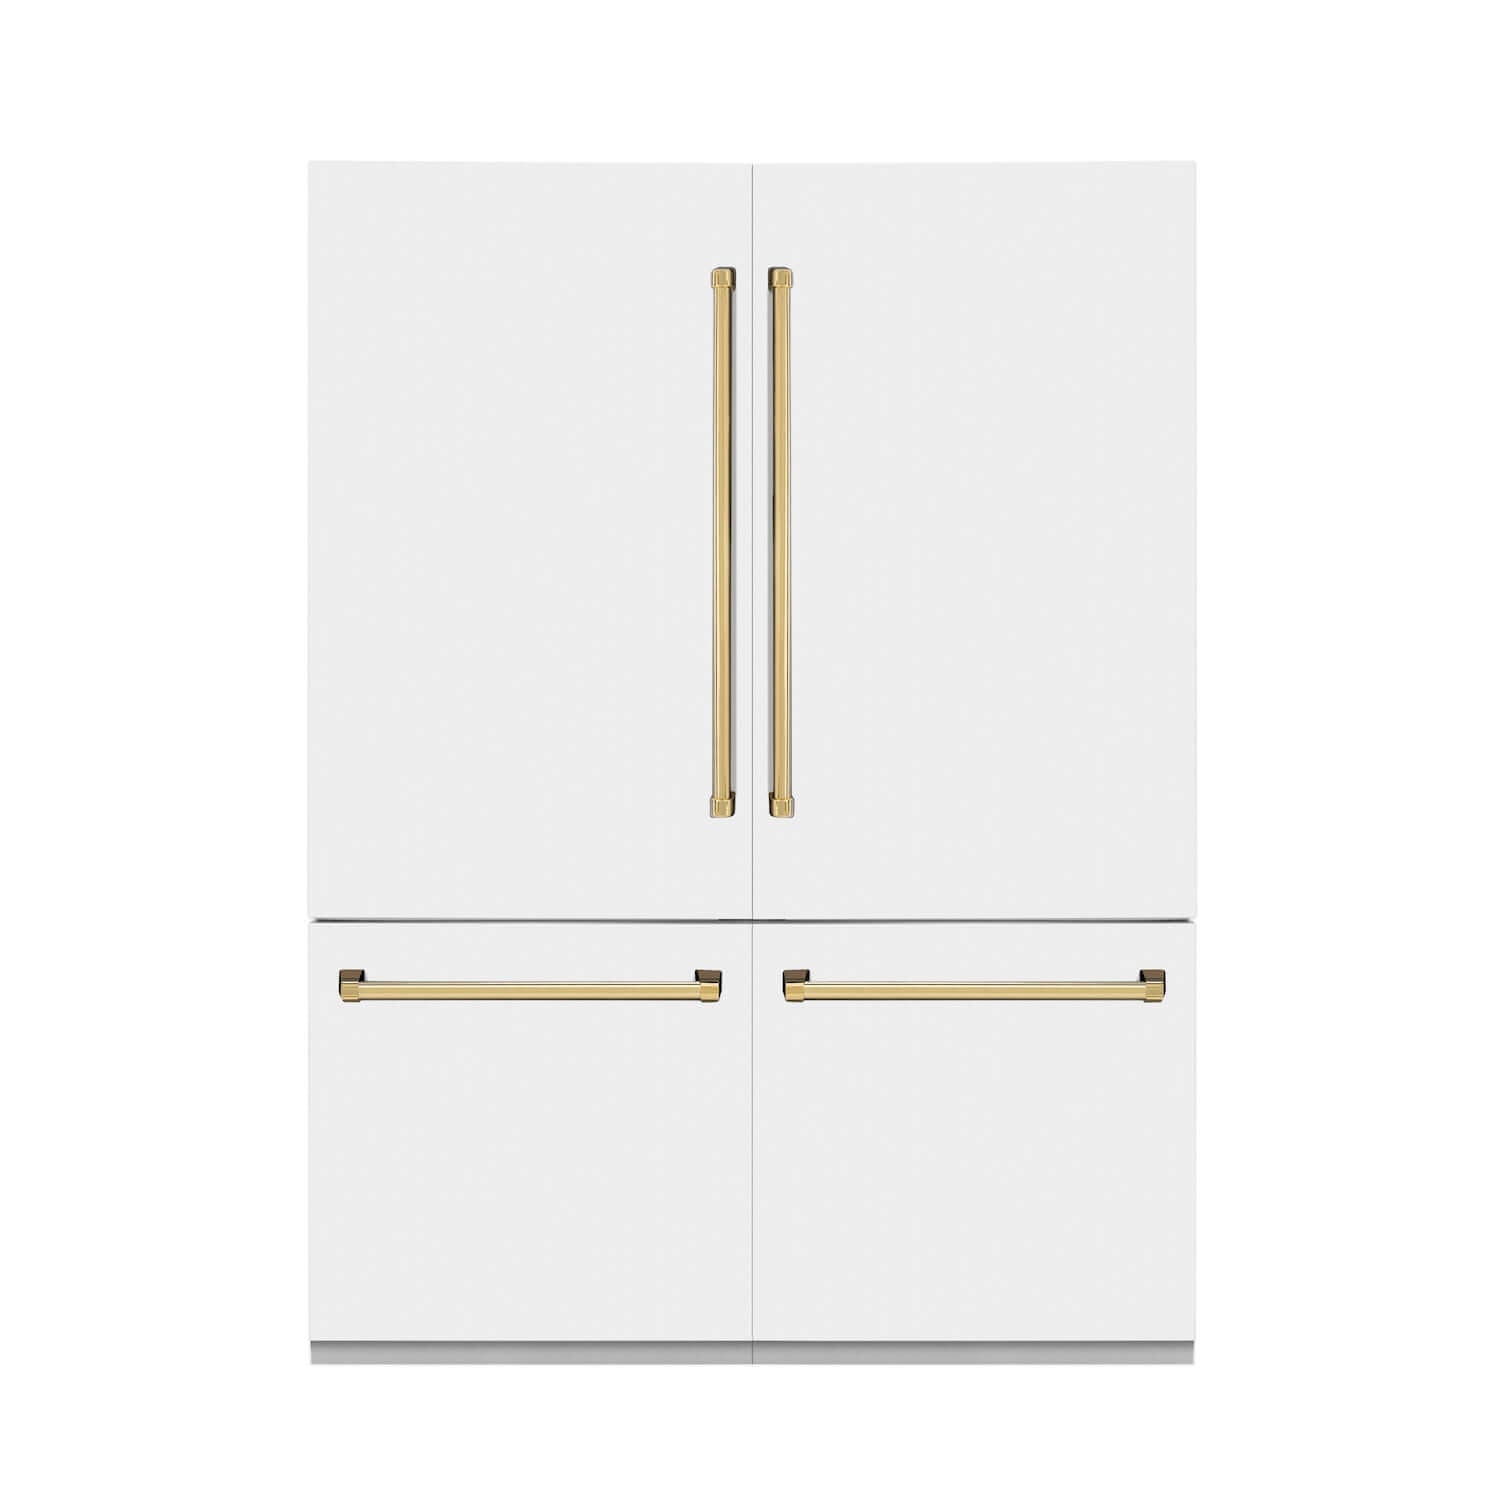 ZLINE 60" Autograph Edition 32.2 cu. ft. Built-in 4-Door French Door Refrigerator with Internal Water and Ice Dispenser in White Matte with Gold Accents (RBIVZ-WM-60-G)